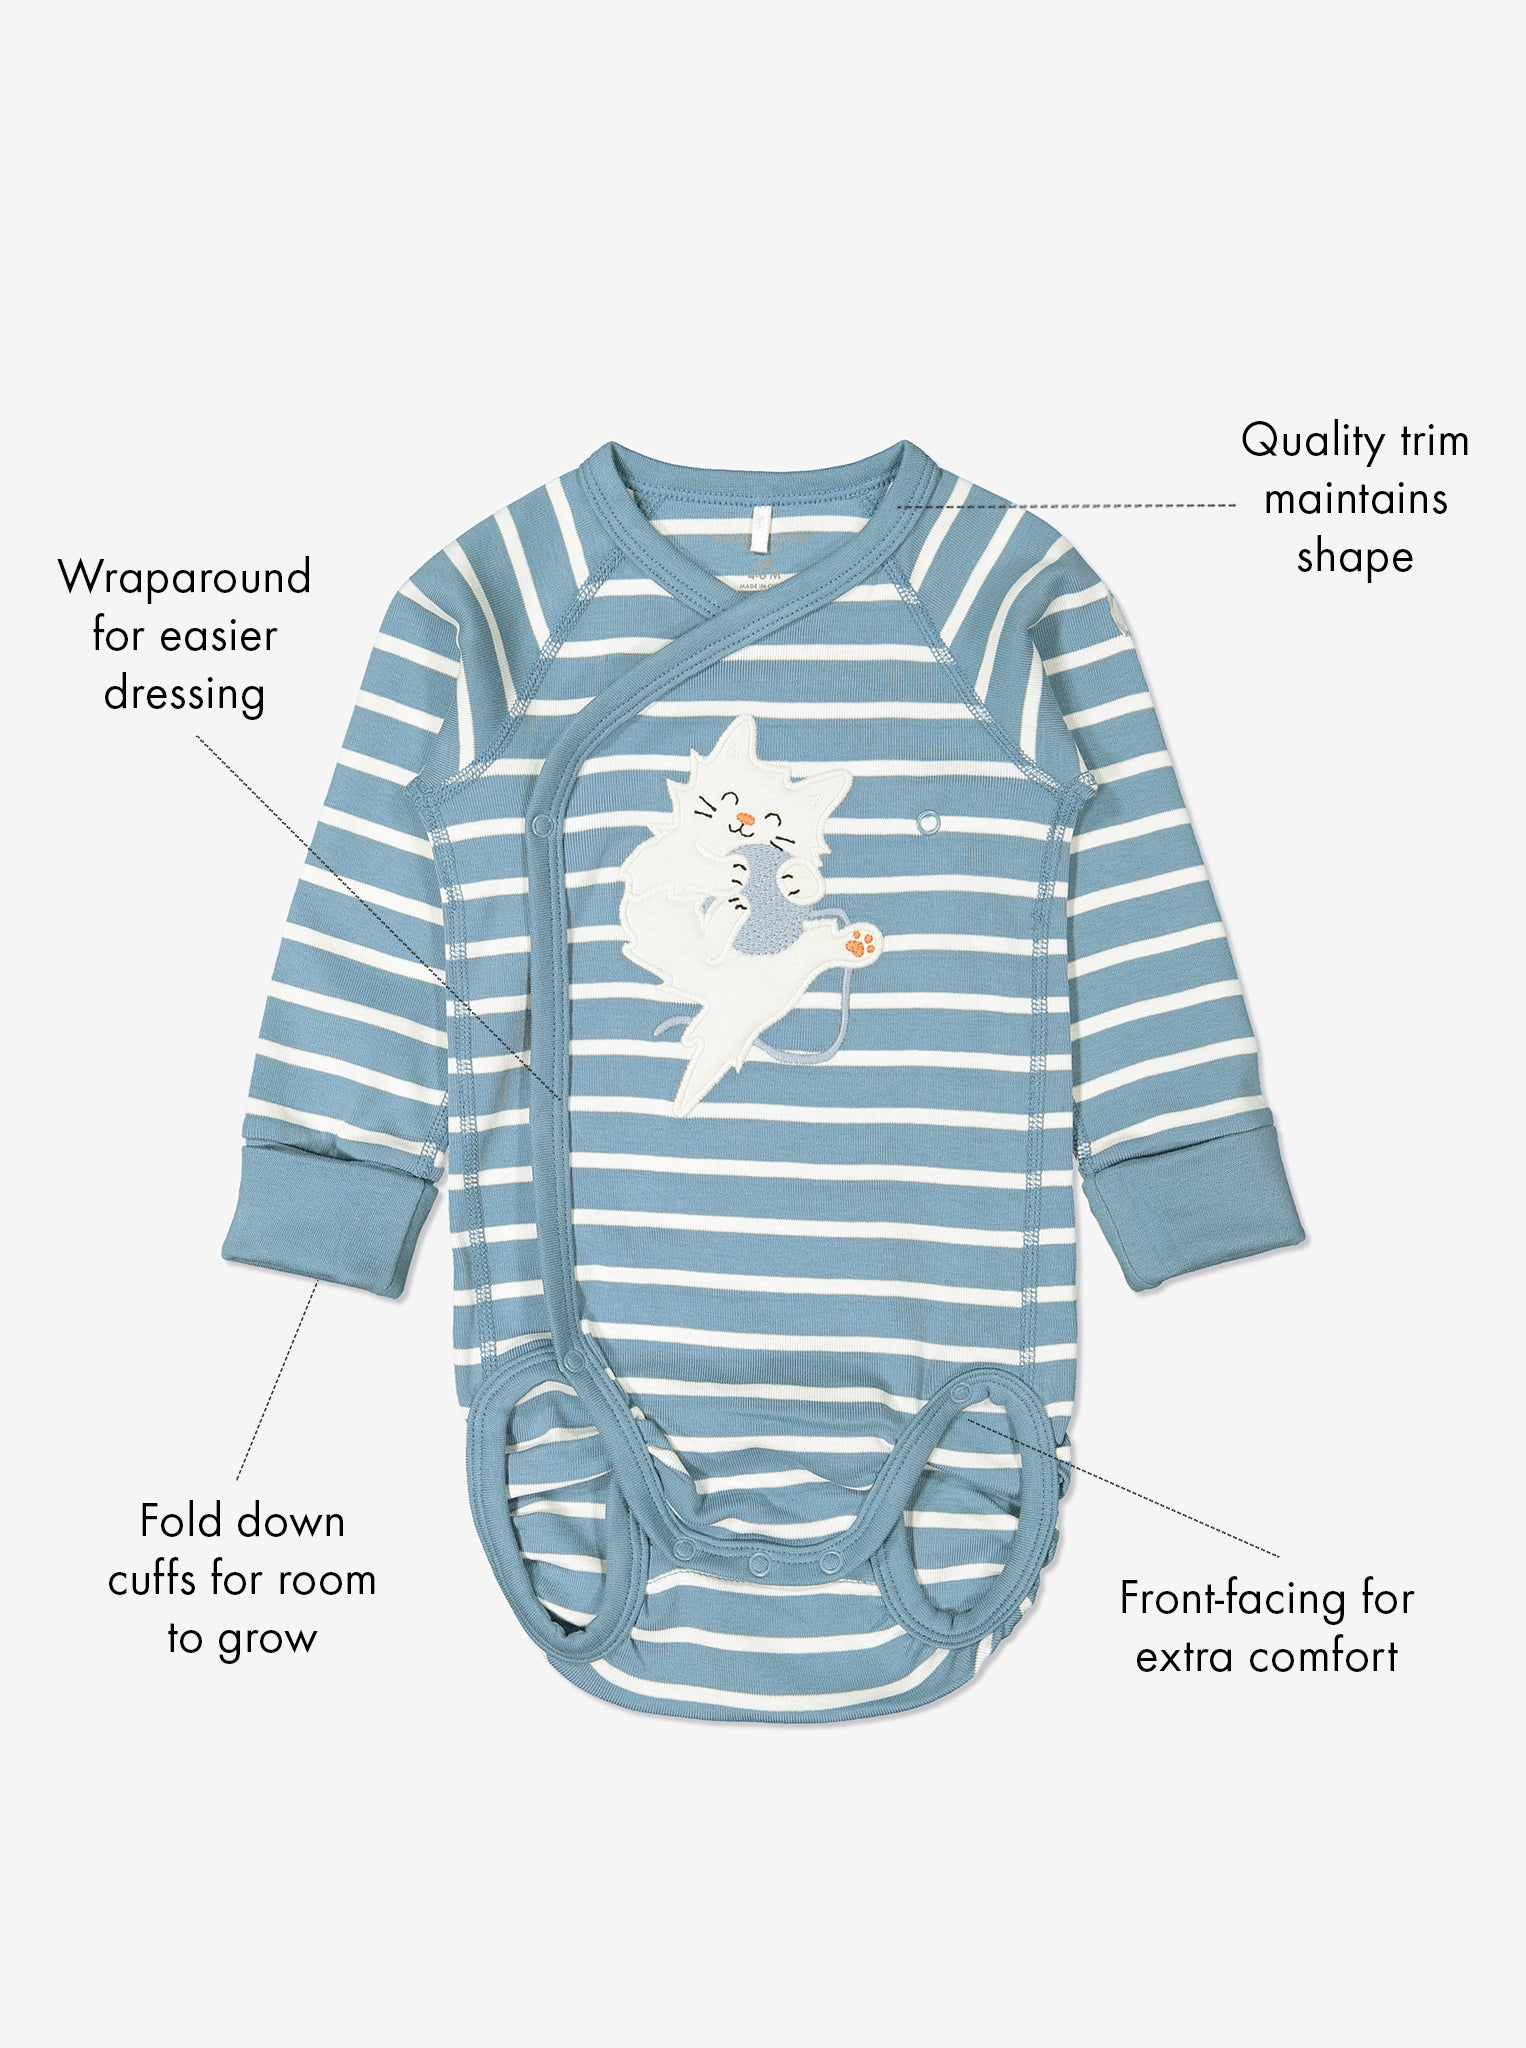 GOTS organic cotton long sleeve babygrow in unisex blue and white stripes with text labels shown on the sides